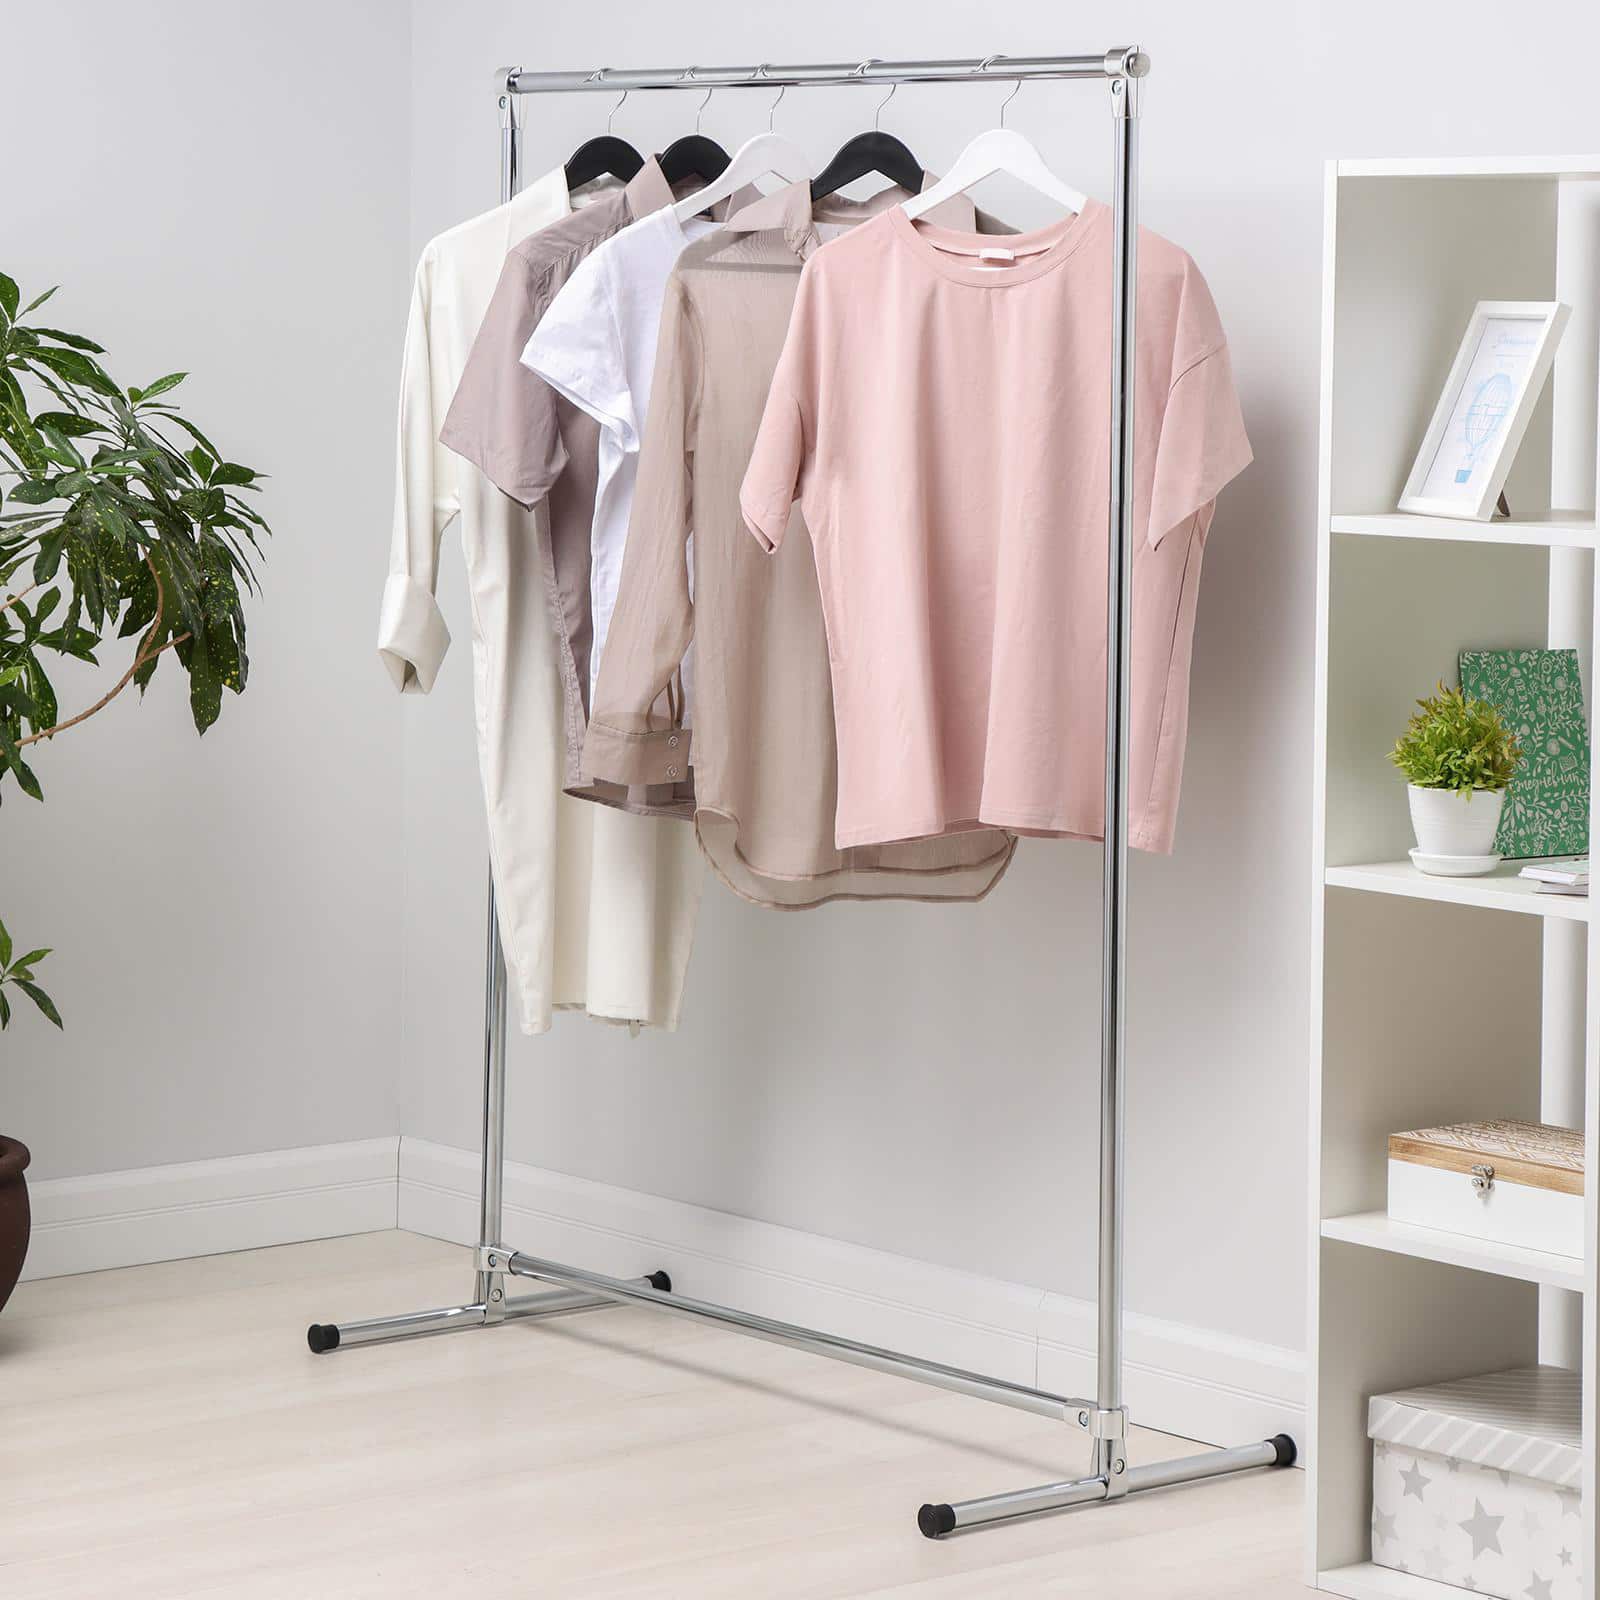 5 Easy Decluttering Hacks For Your New Home. Portable mobile clothes wardrobe at the casual interior